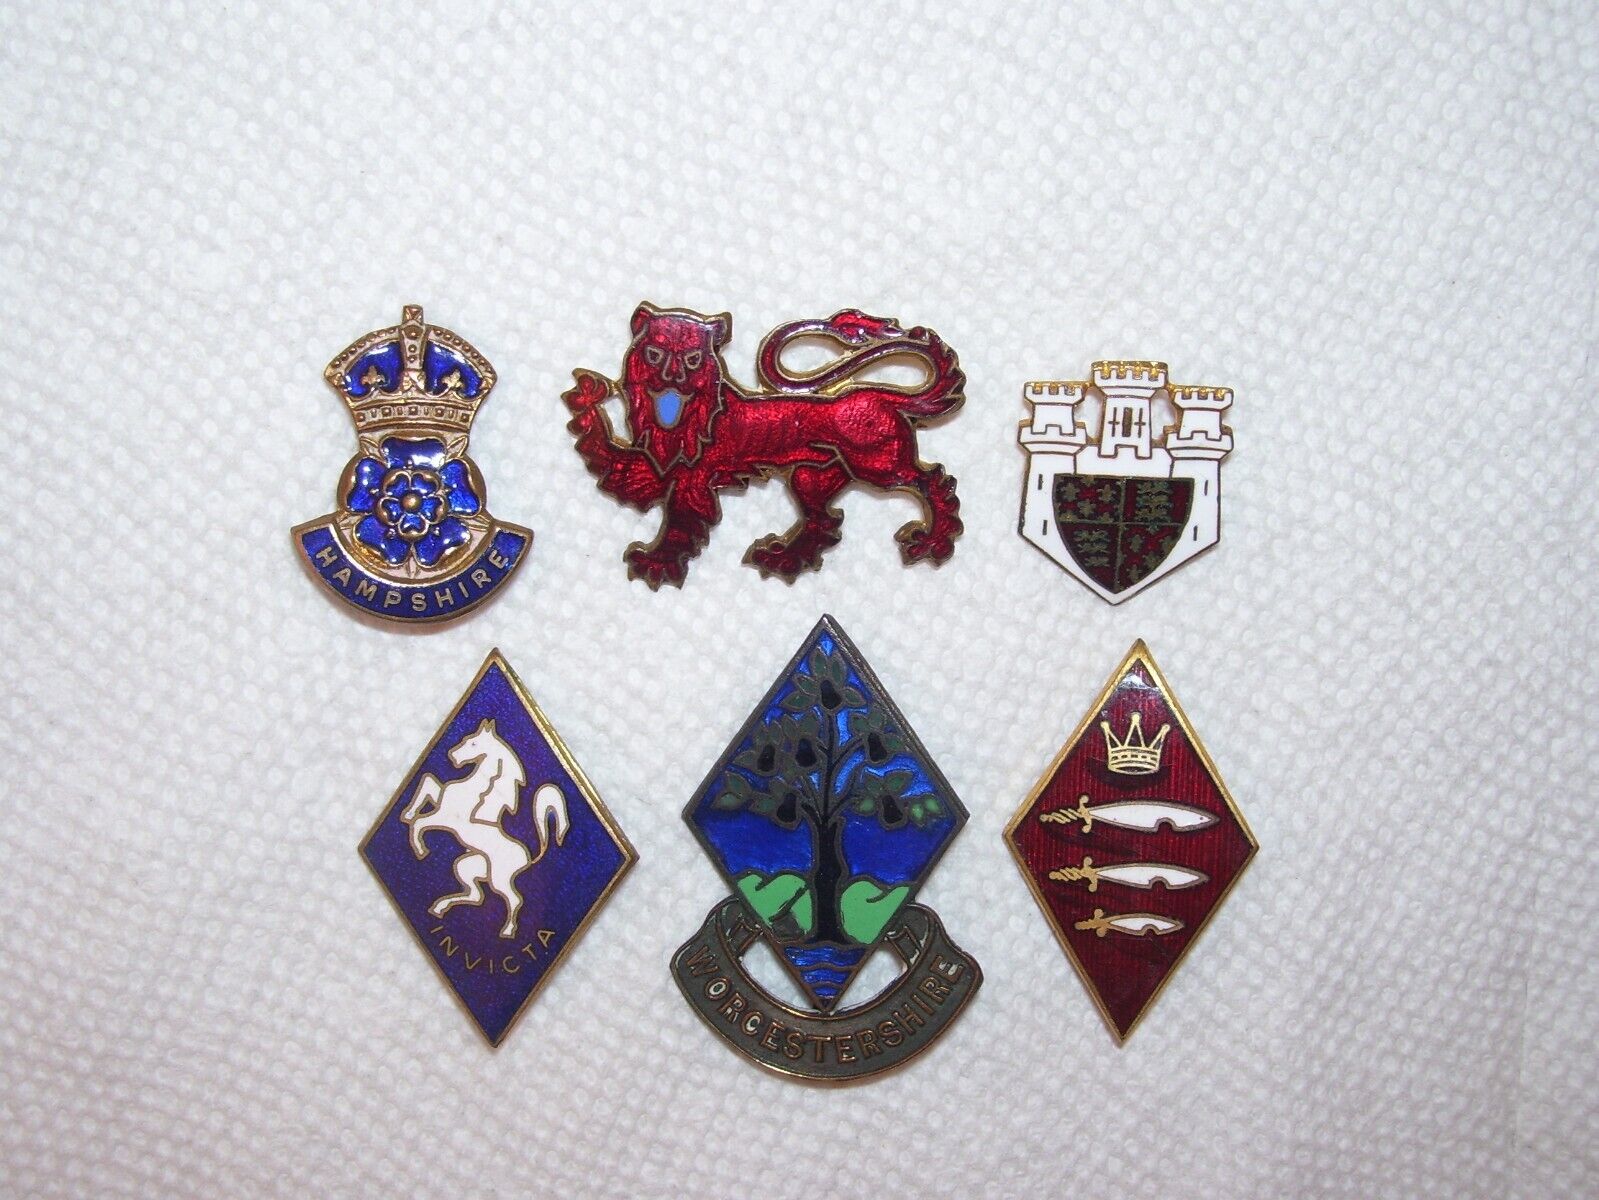 6 GIRL GUIDES COUNTY BADGES PINS LOT SURREY MIDDLESEX KENT DORSET  HAMPSHIRE